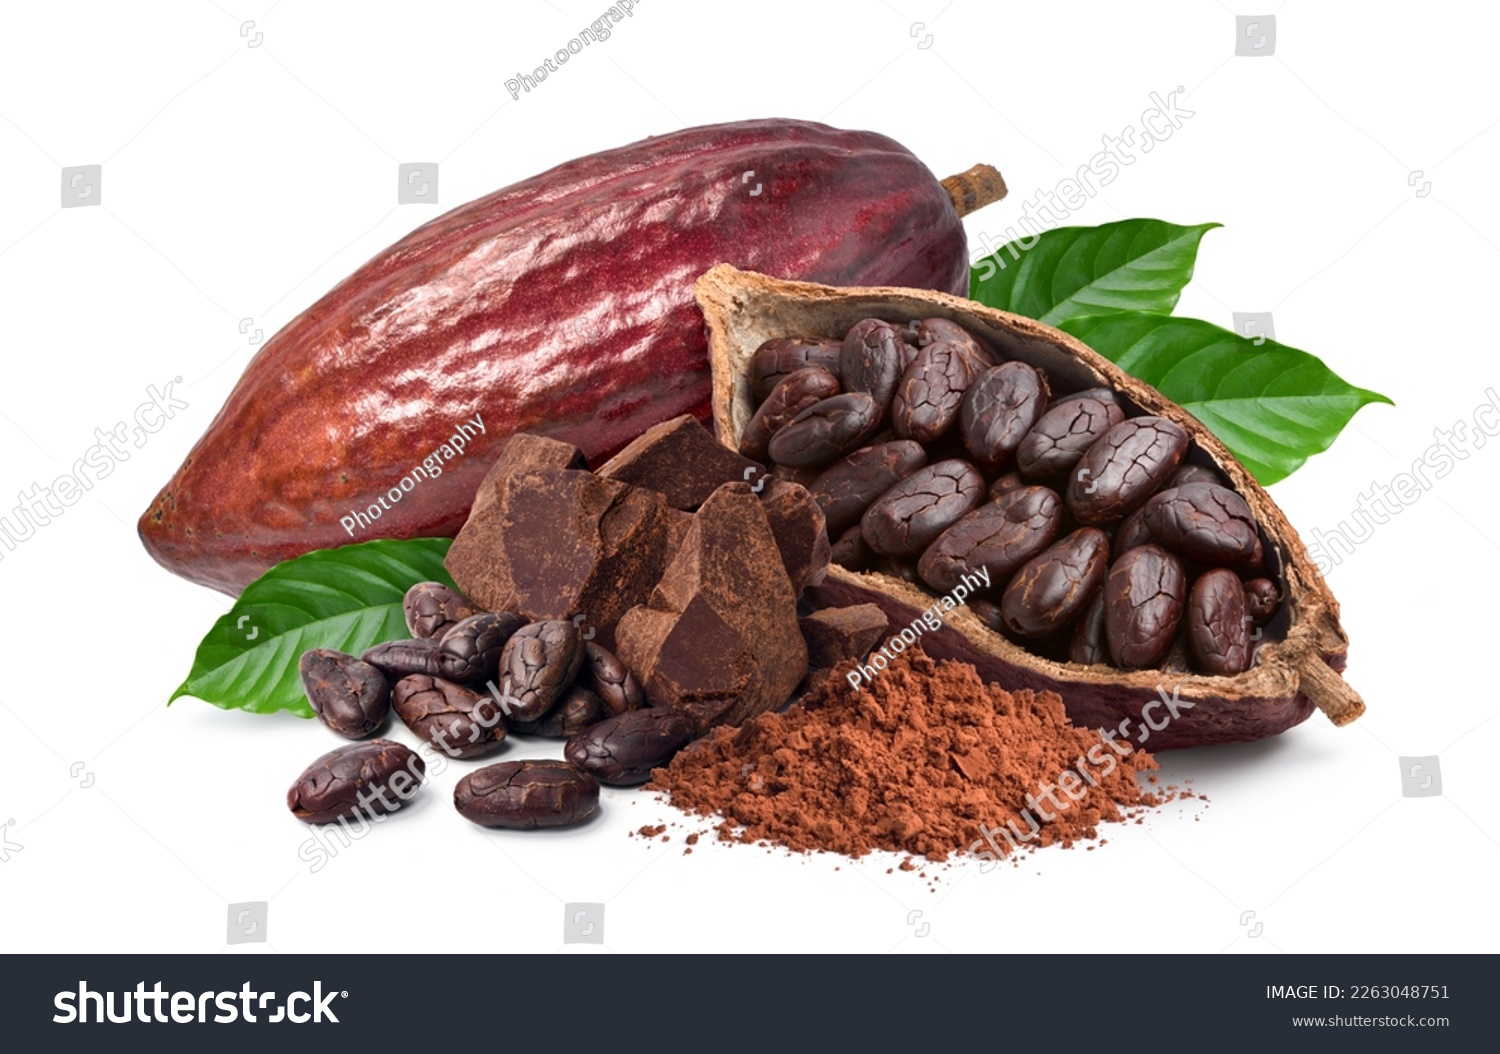 Cocoa ingredients with cocoa beans, fresh cocoa pod and cocoa mass isolated on white background. #2263048751